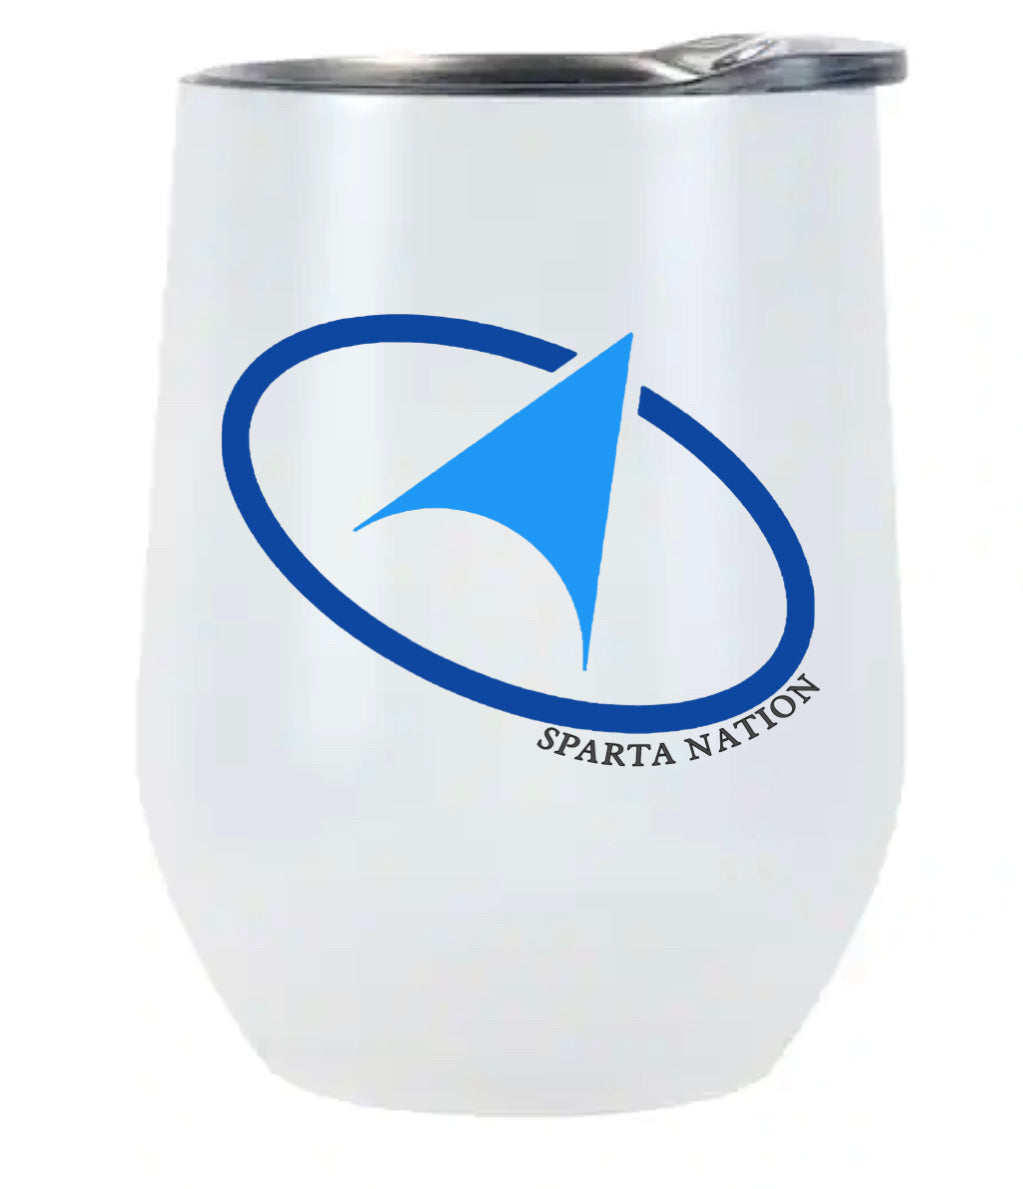 SPARTA NATION TUMBLER CUPS COLLECTION